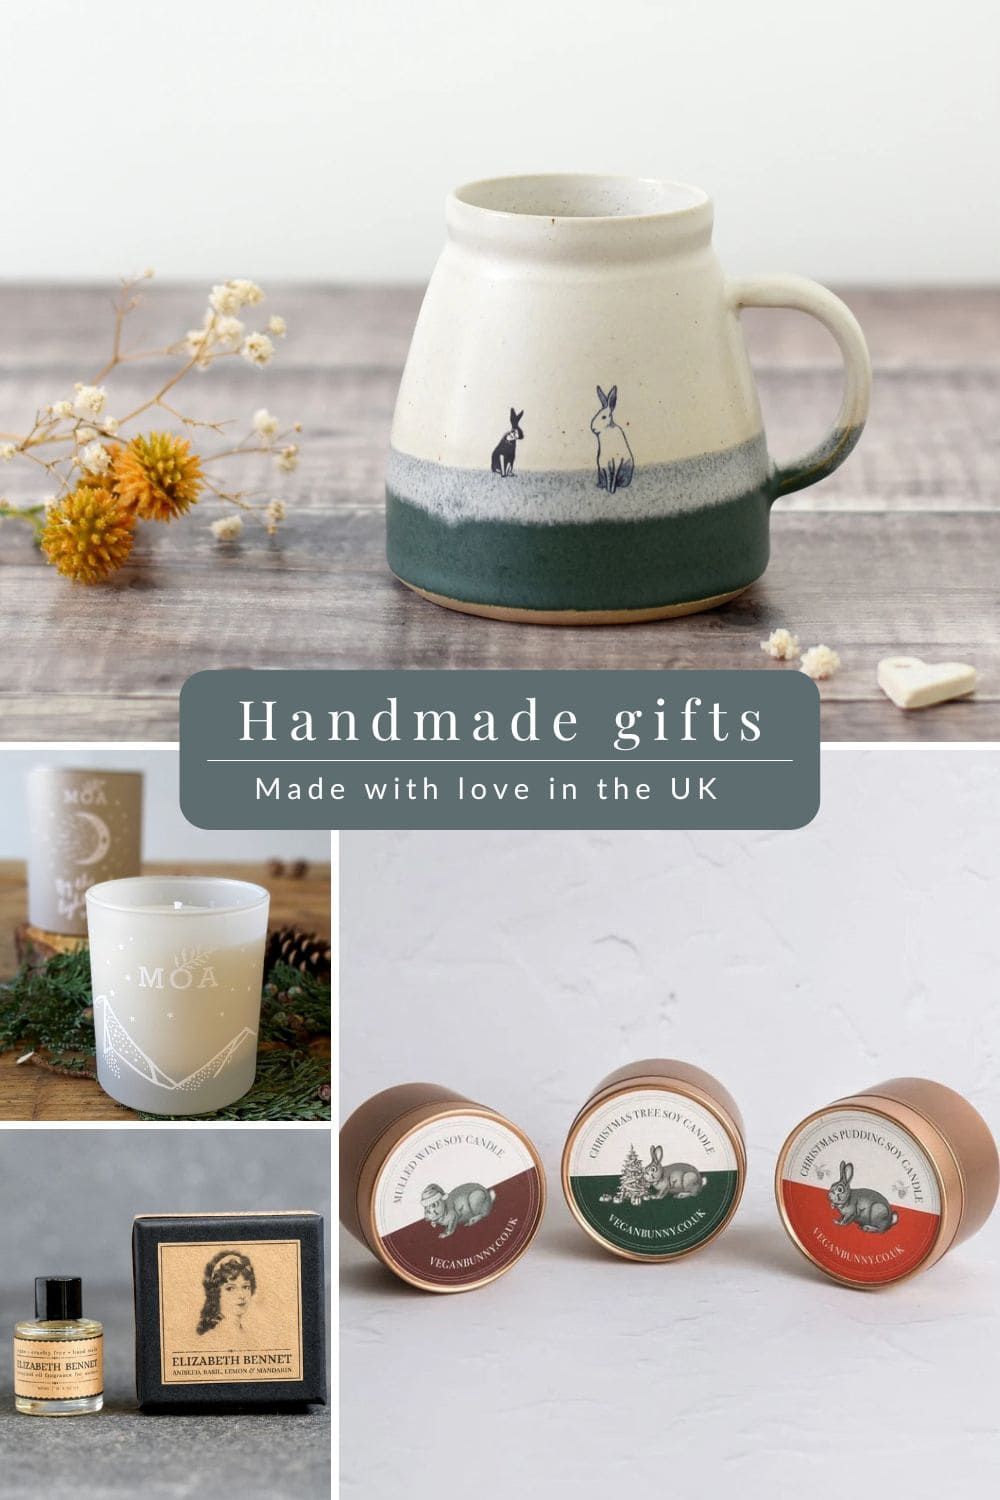 handmade gifts made in in Britain with care for the environment by a few of my favourite independent makers including linen wheat bags, hand made ceramic mugs, the smartest sashiko handmade dog collars, japanese boro style aprons, natural soap, lip gloss that tastes like red velvet cup cakes and much more...